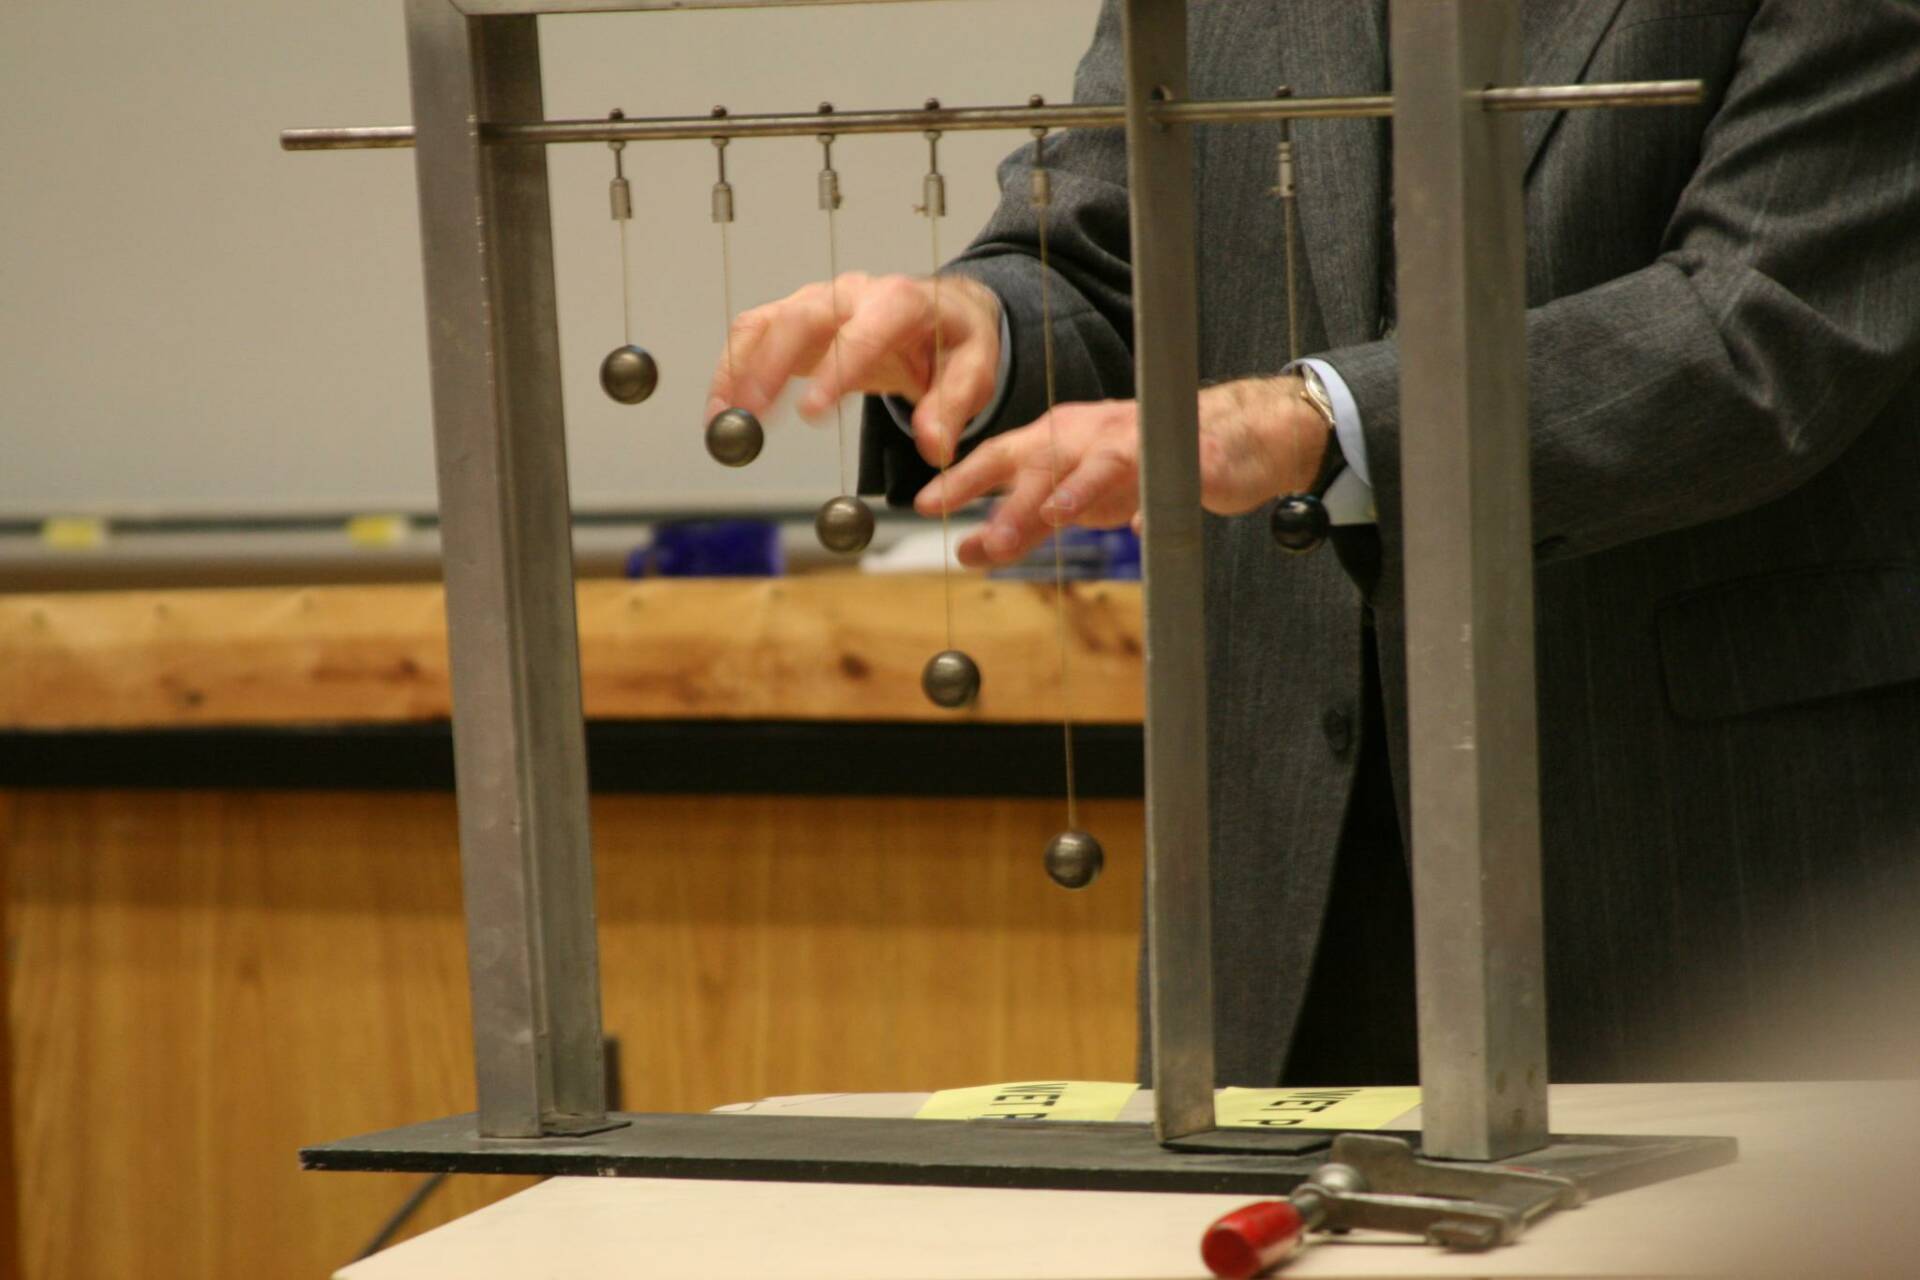 A professor demonstrates a physics experiment using a set of hanging pendulums